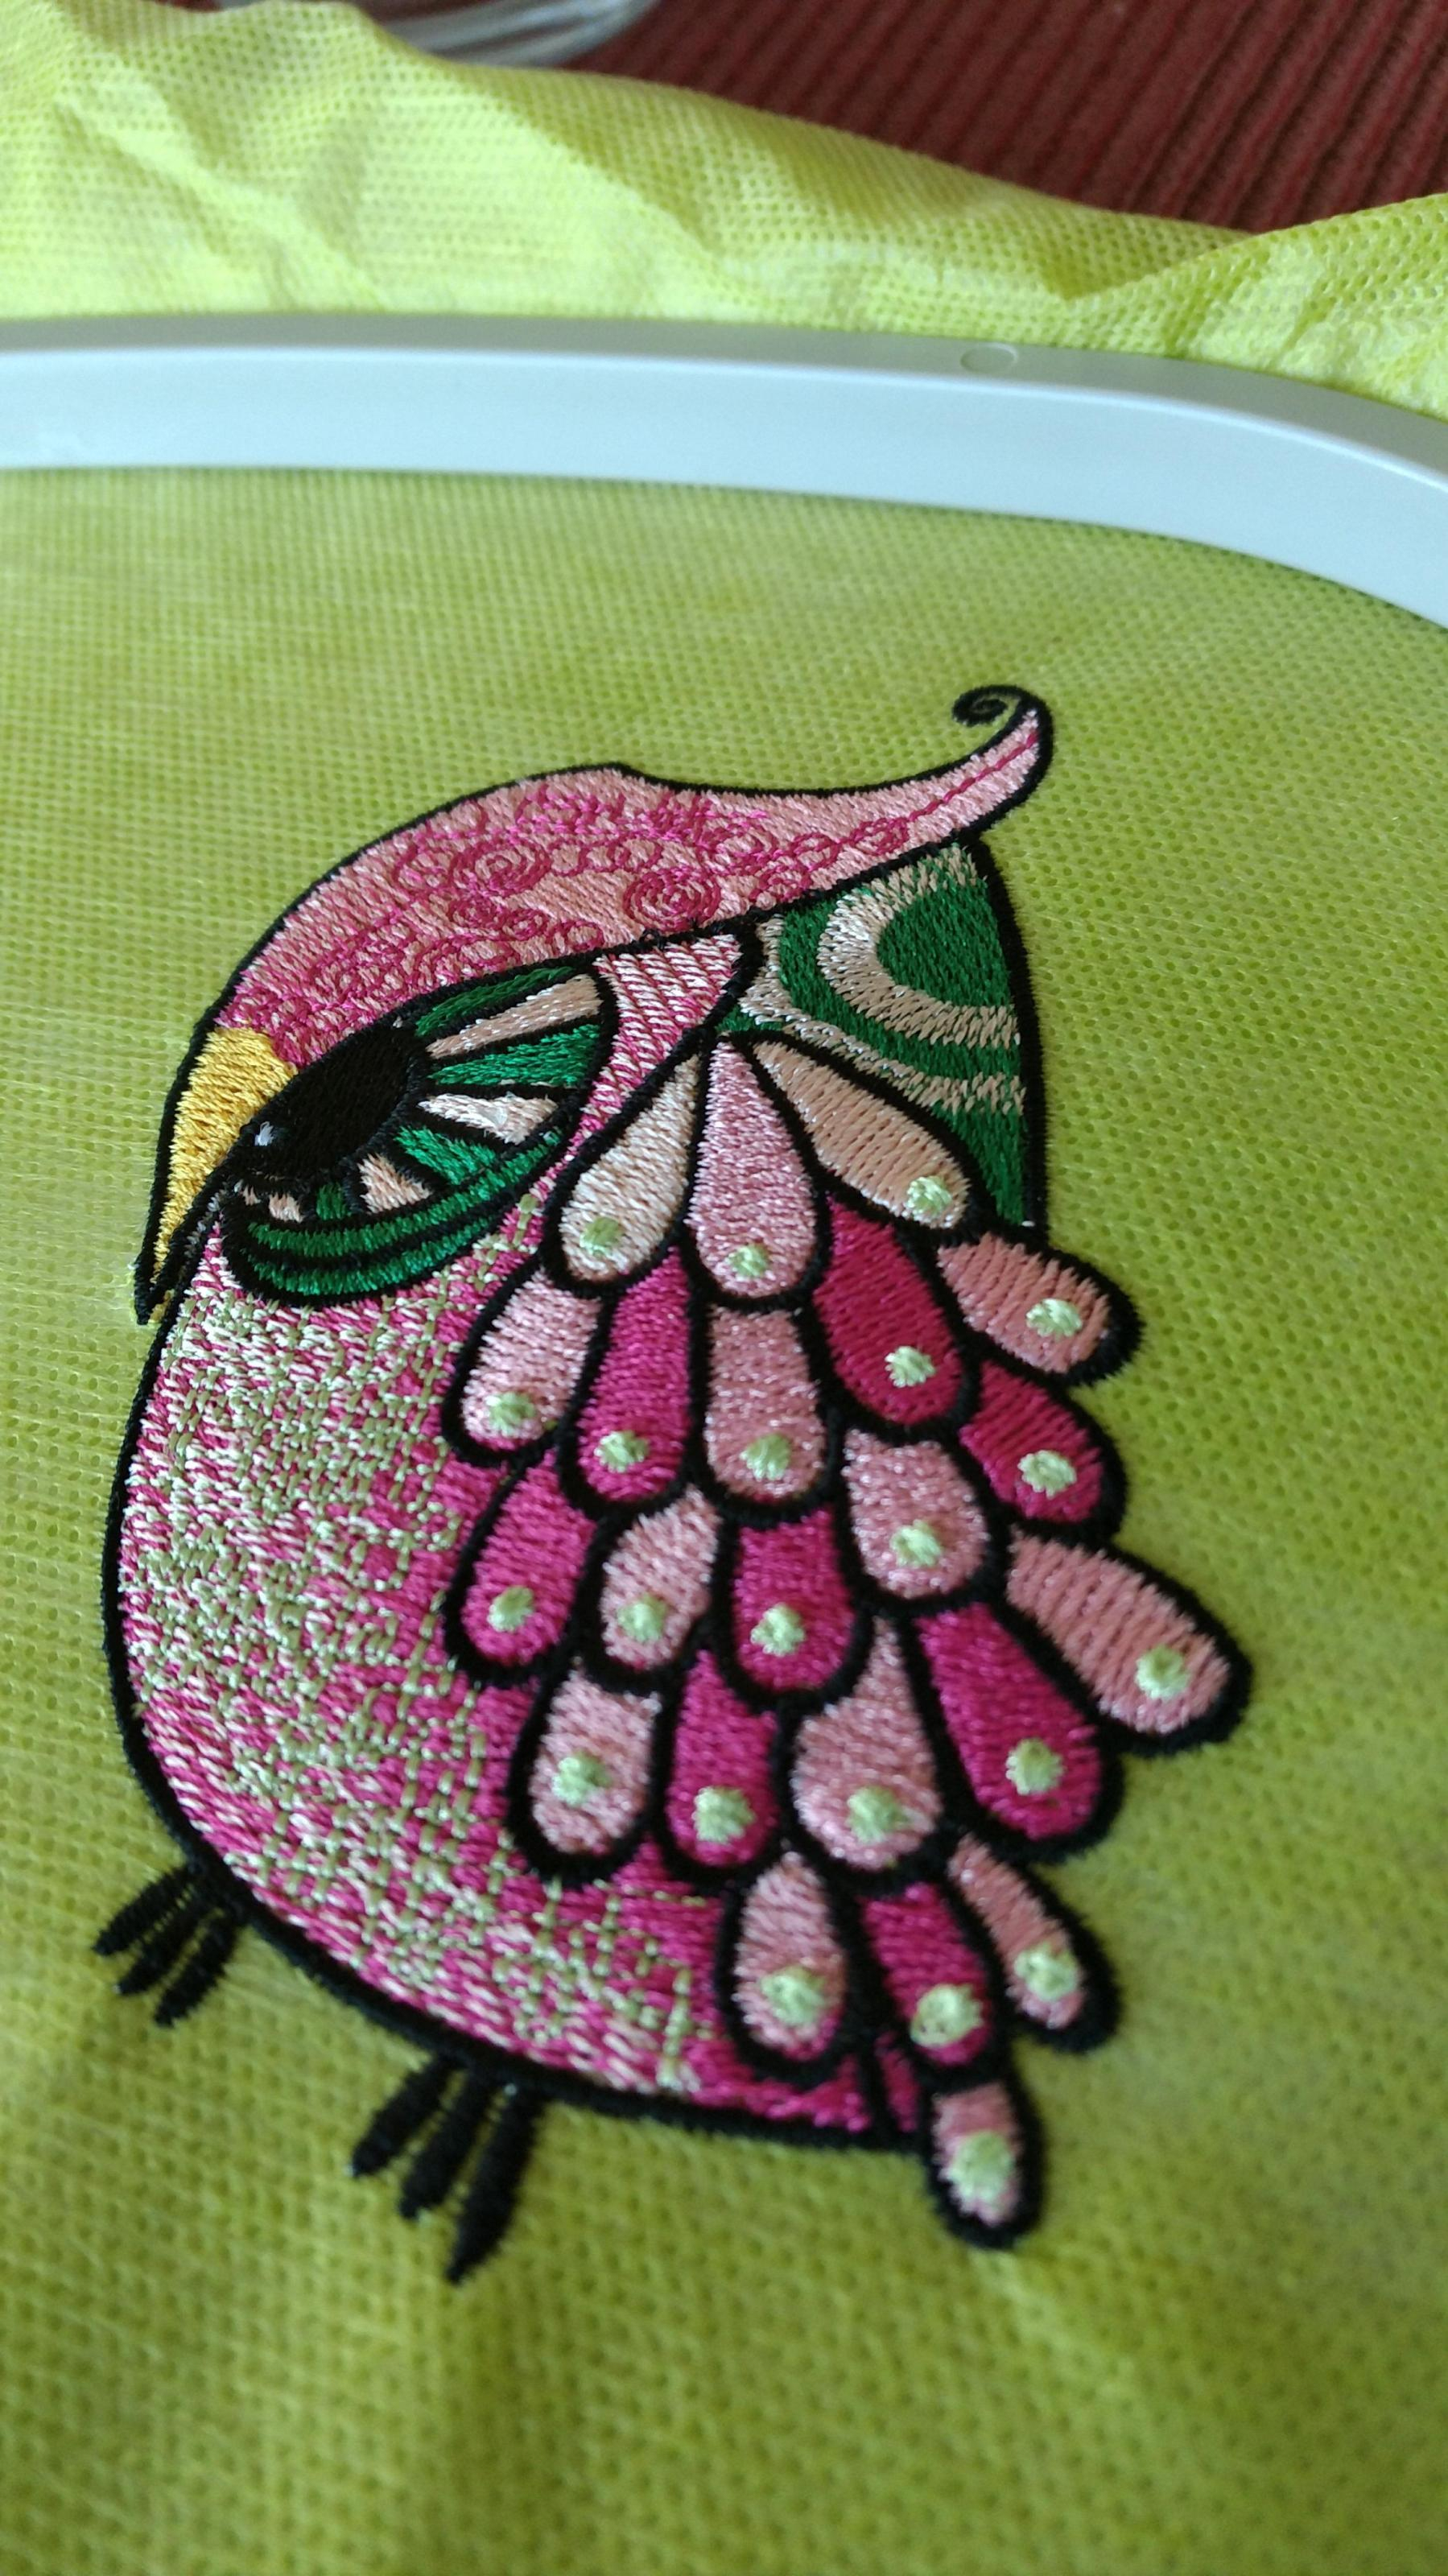 Owl Embroidery Pattern Angry Owl Embroidery Design Showcase With Fauna Embroidery